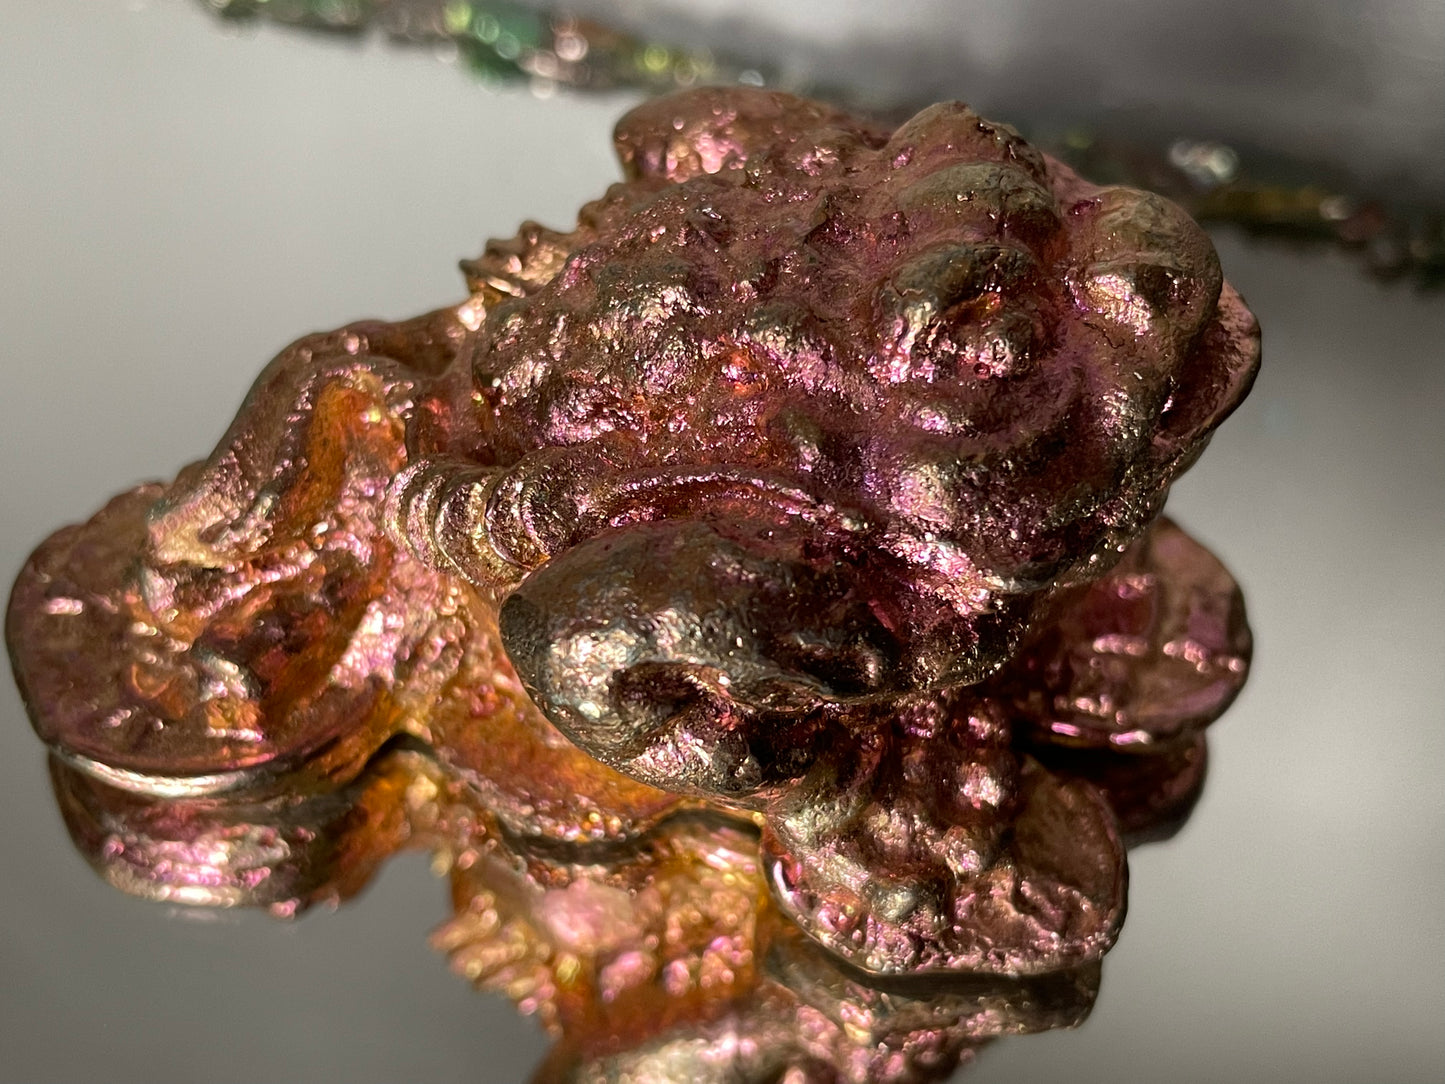 Pink Bismuth Crystal Lucky Chinese Frog Metal Art Sculpture